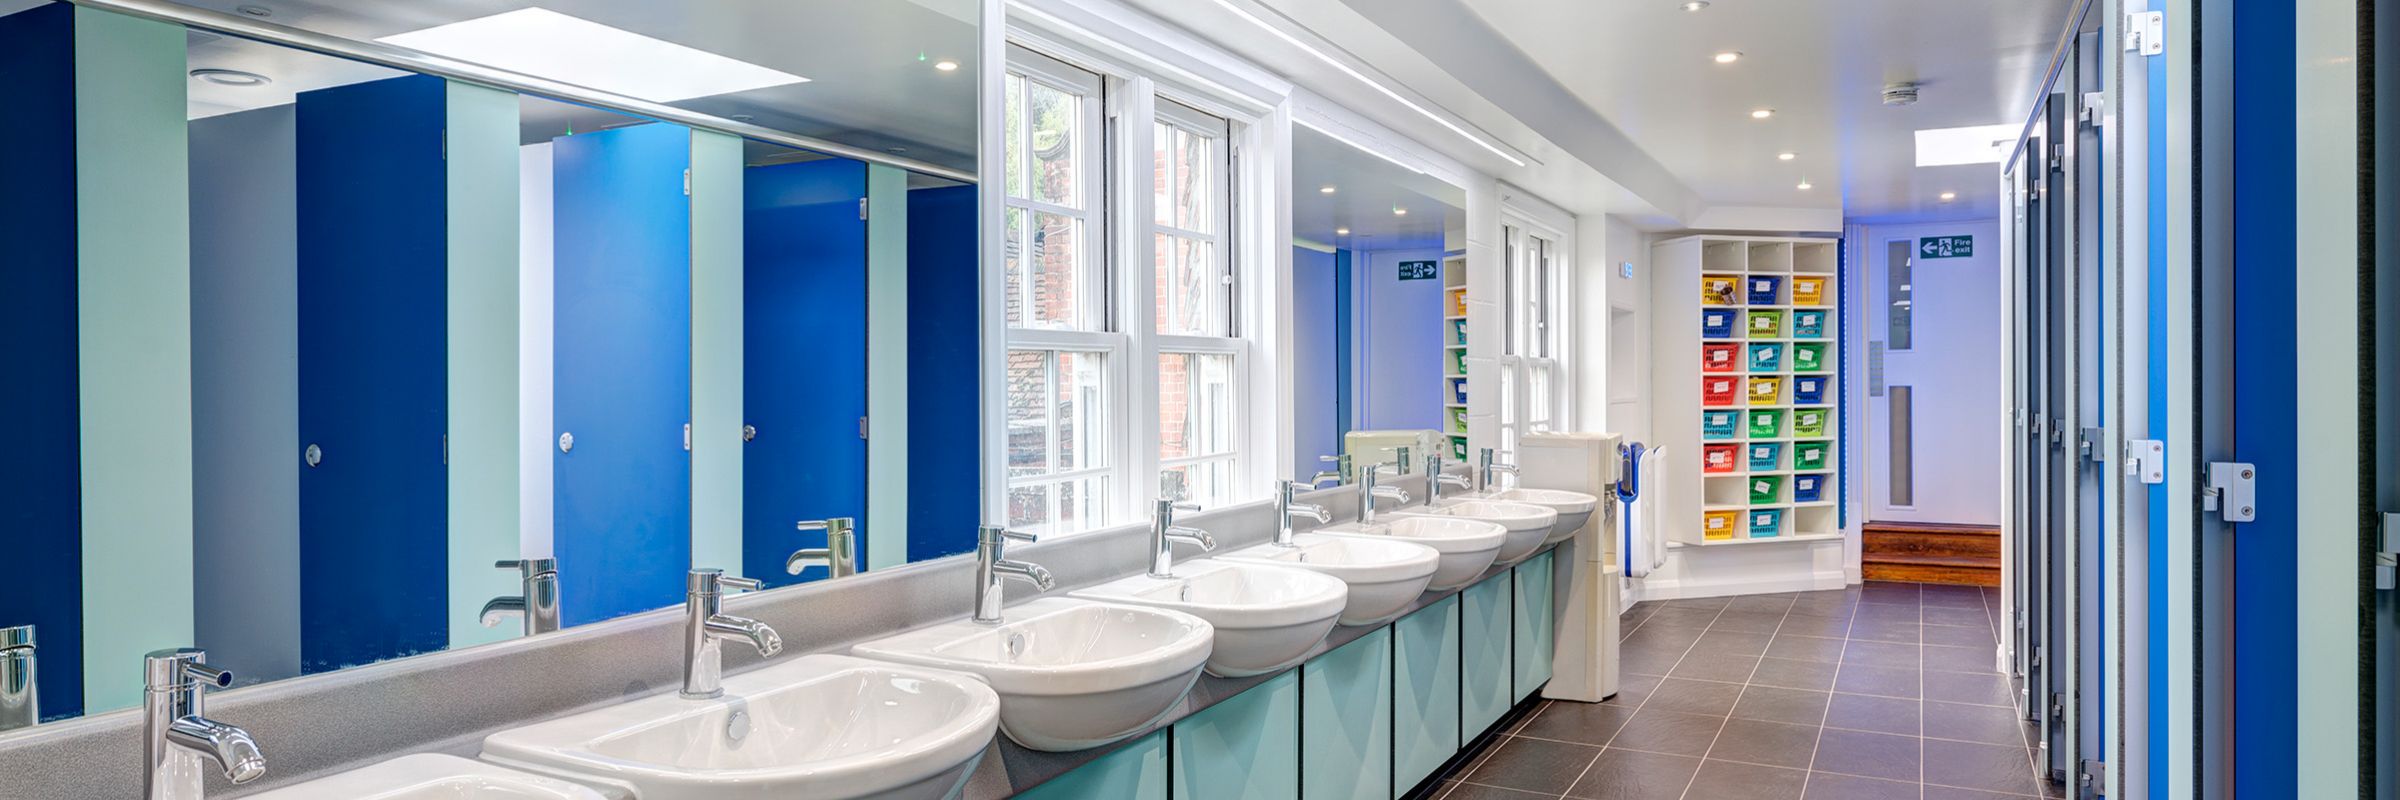 St Johns Beaumont | Washroom | School Design by Westcountry Group